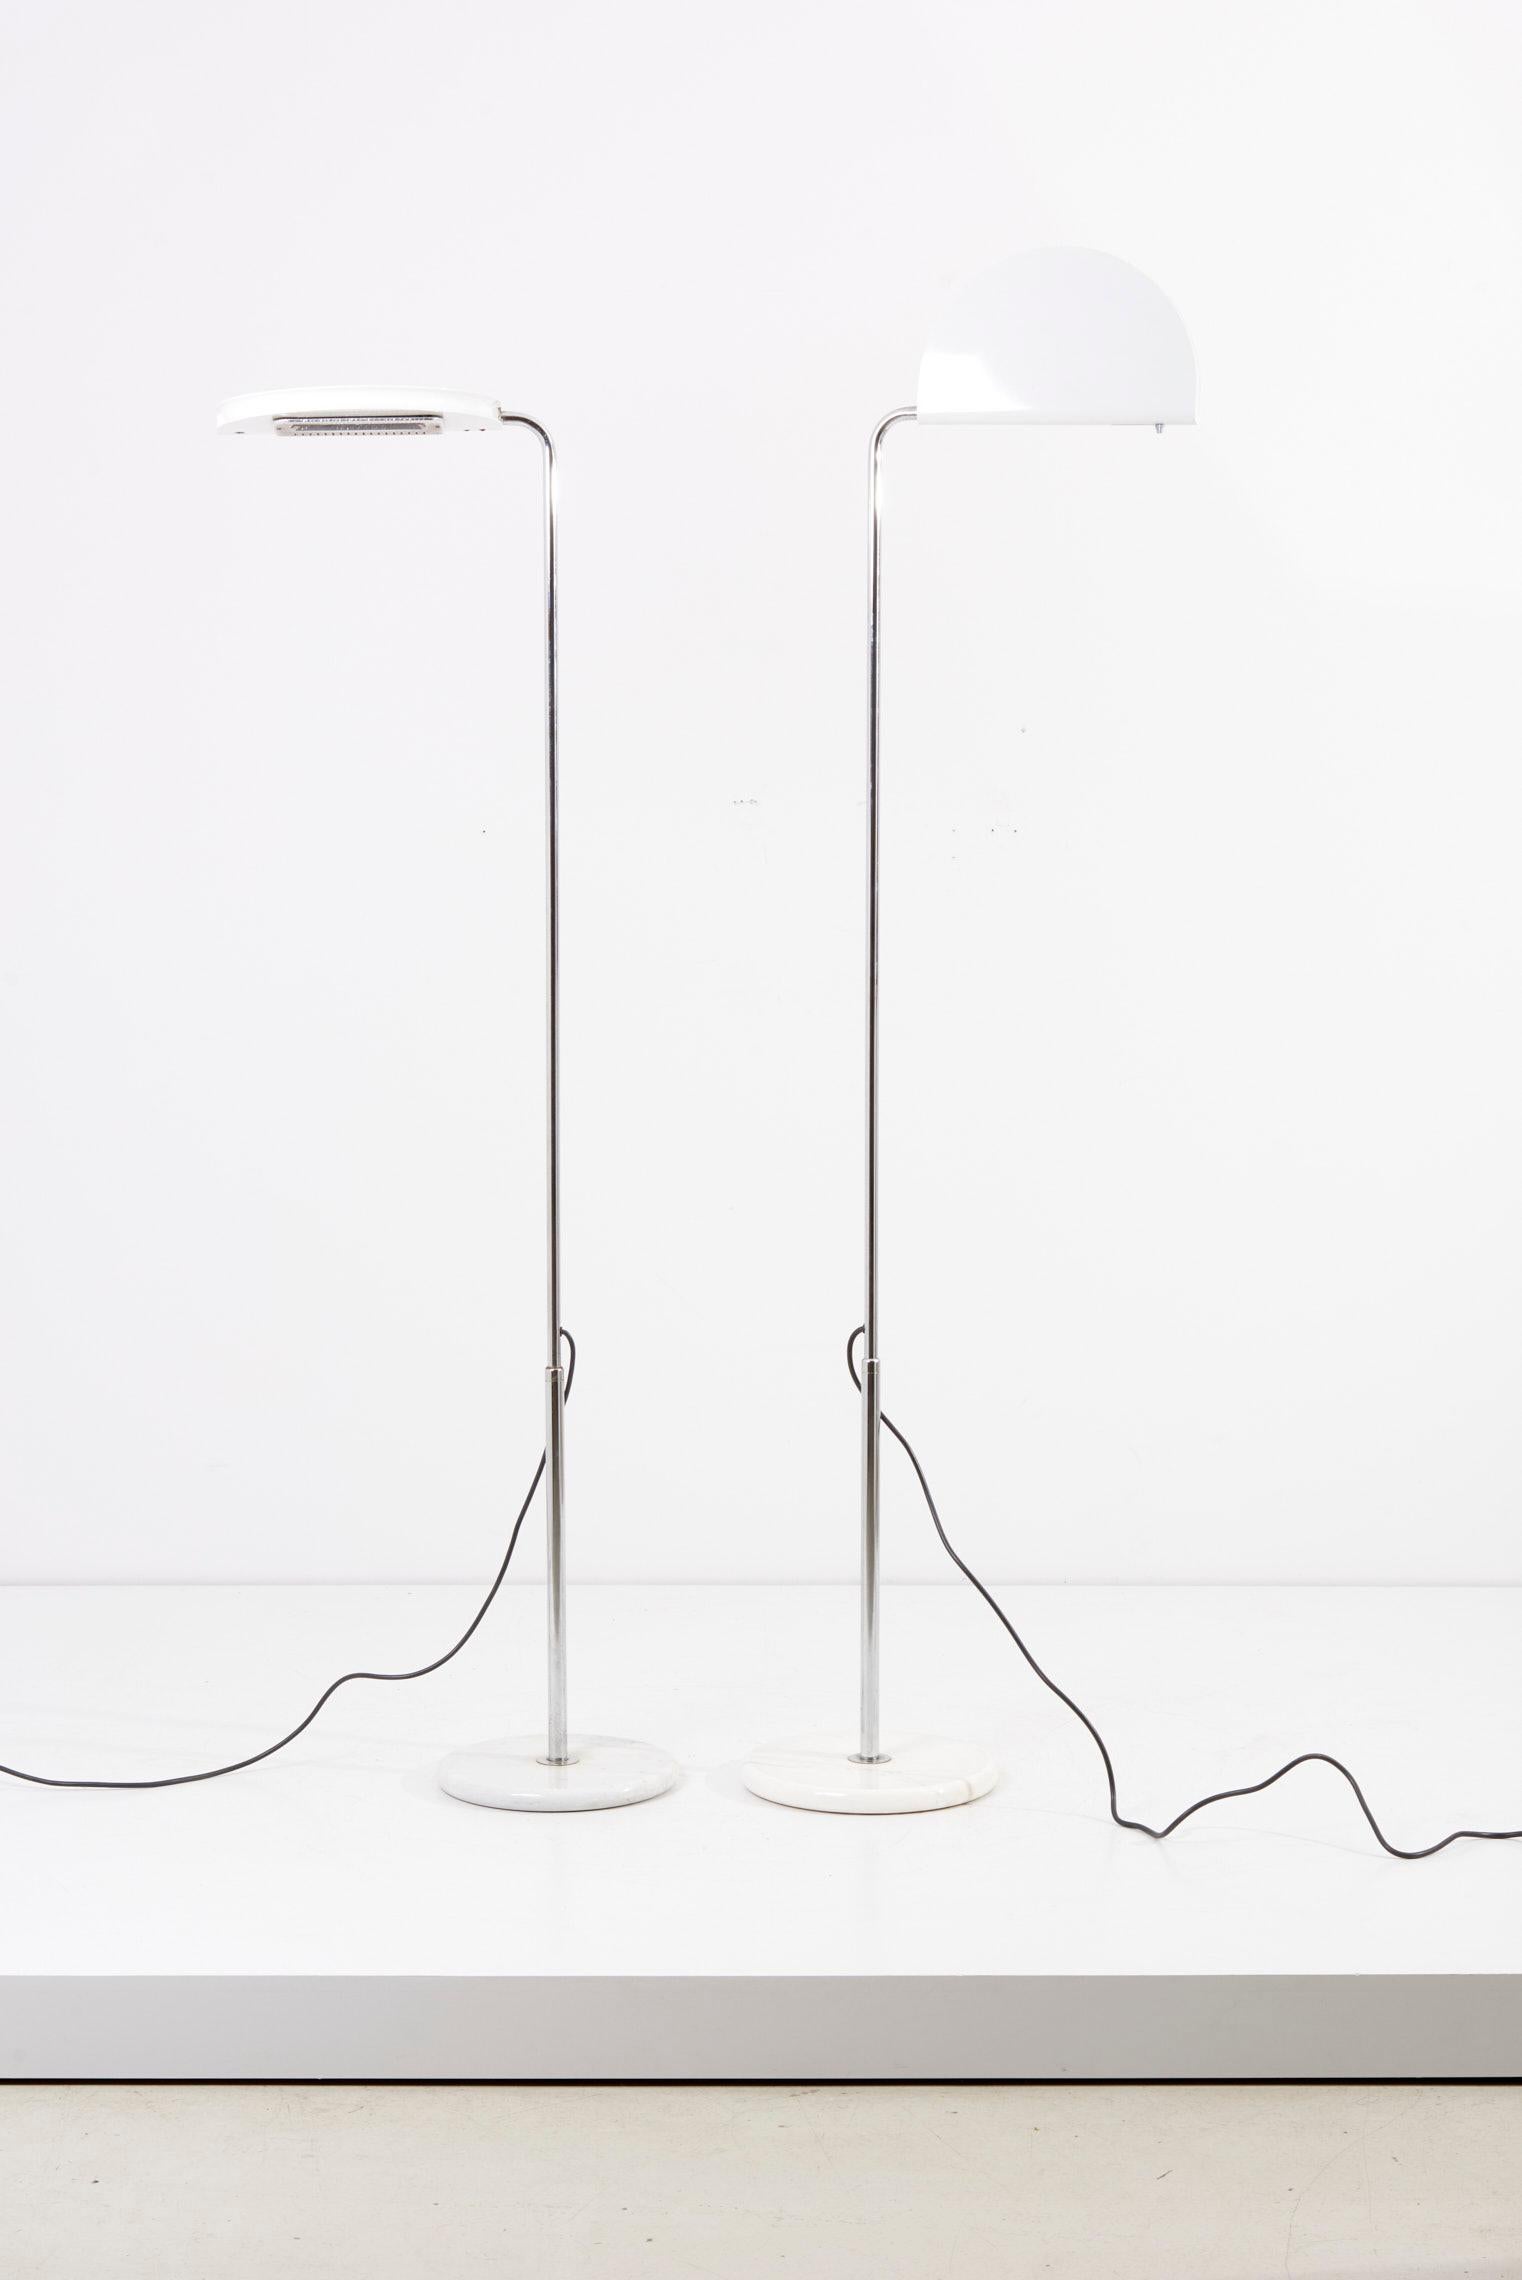 Pair of adjustable Mezzaluna floor lamps, designed in 1970s by Bruno Gecchelin and manufactured by Skipper in Italy.

? x E? socket / each.

Please note: Lamp should be fitted professionally in accordance to local requirements.